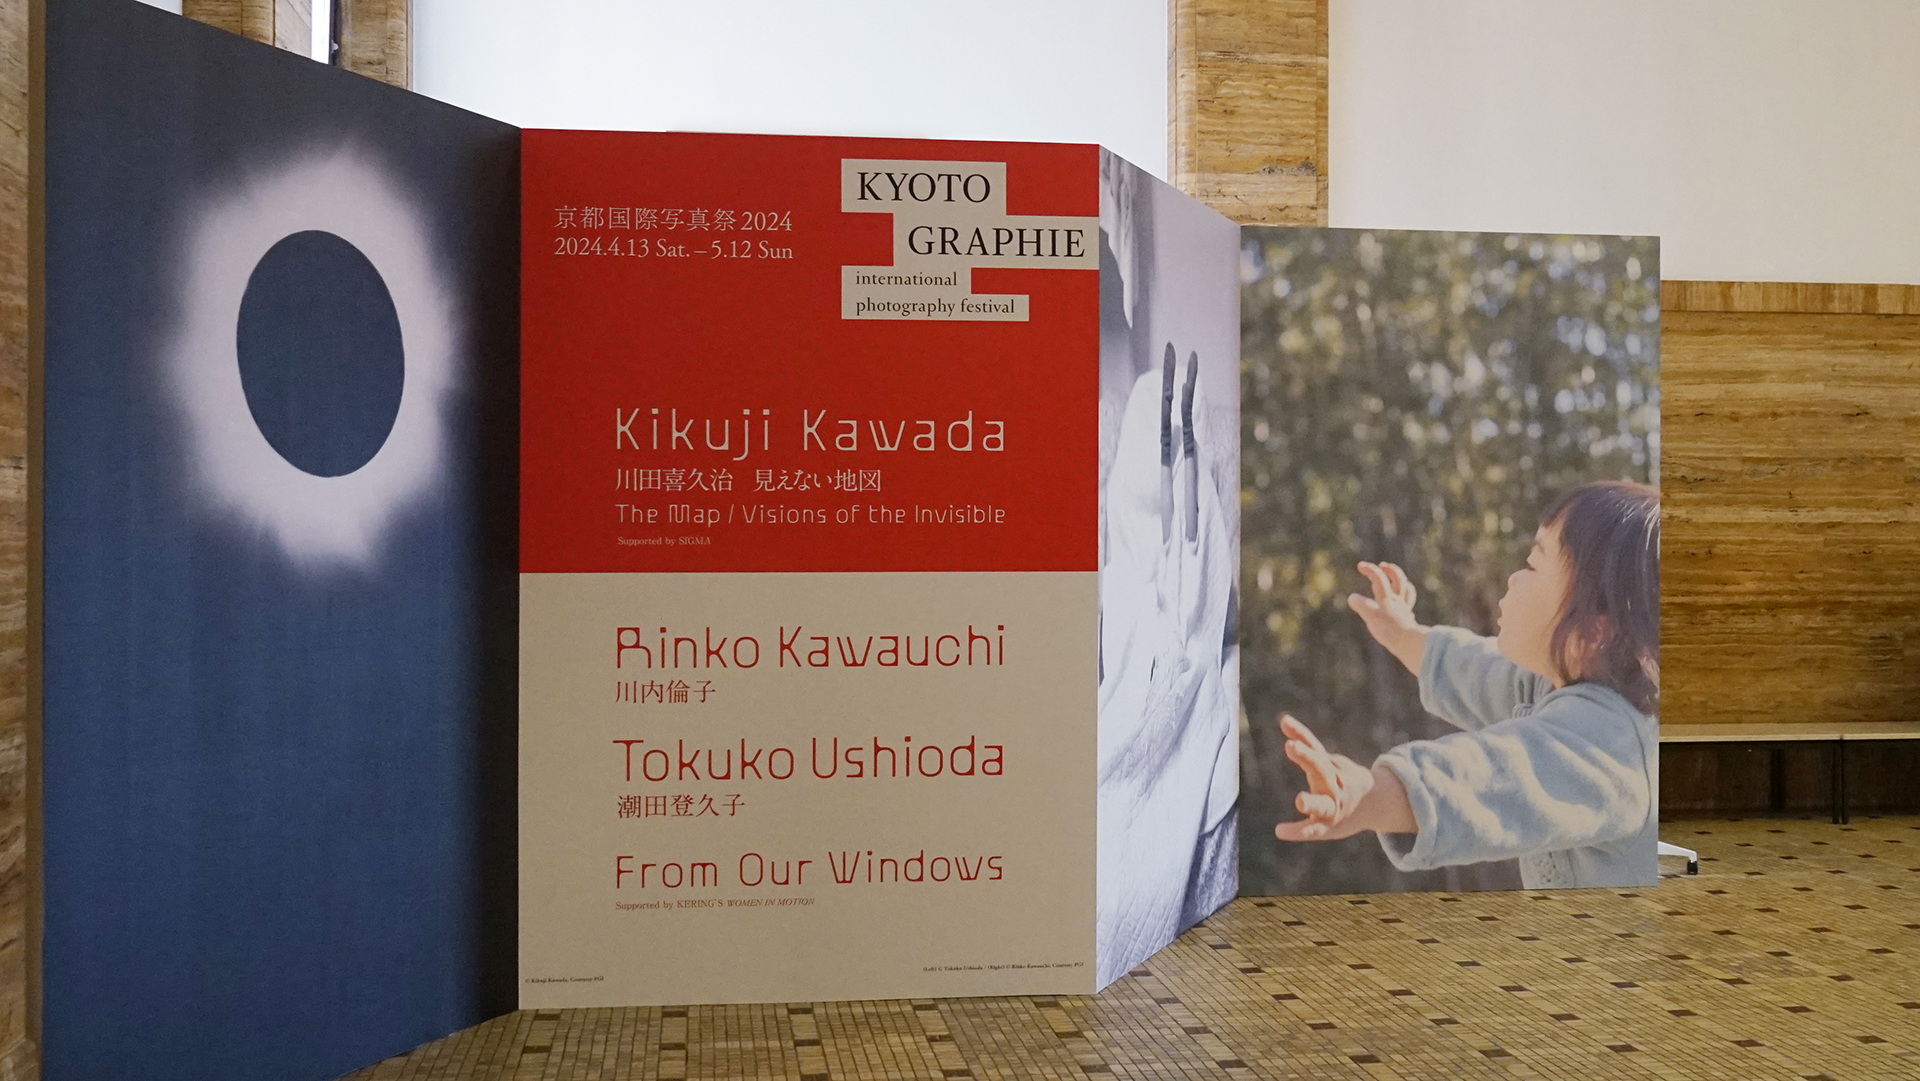 KYOTOGRAPHIE 京都国際写真展 2024｜Cui Cui ＋ as it is From Our 